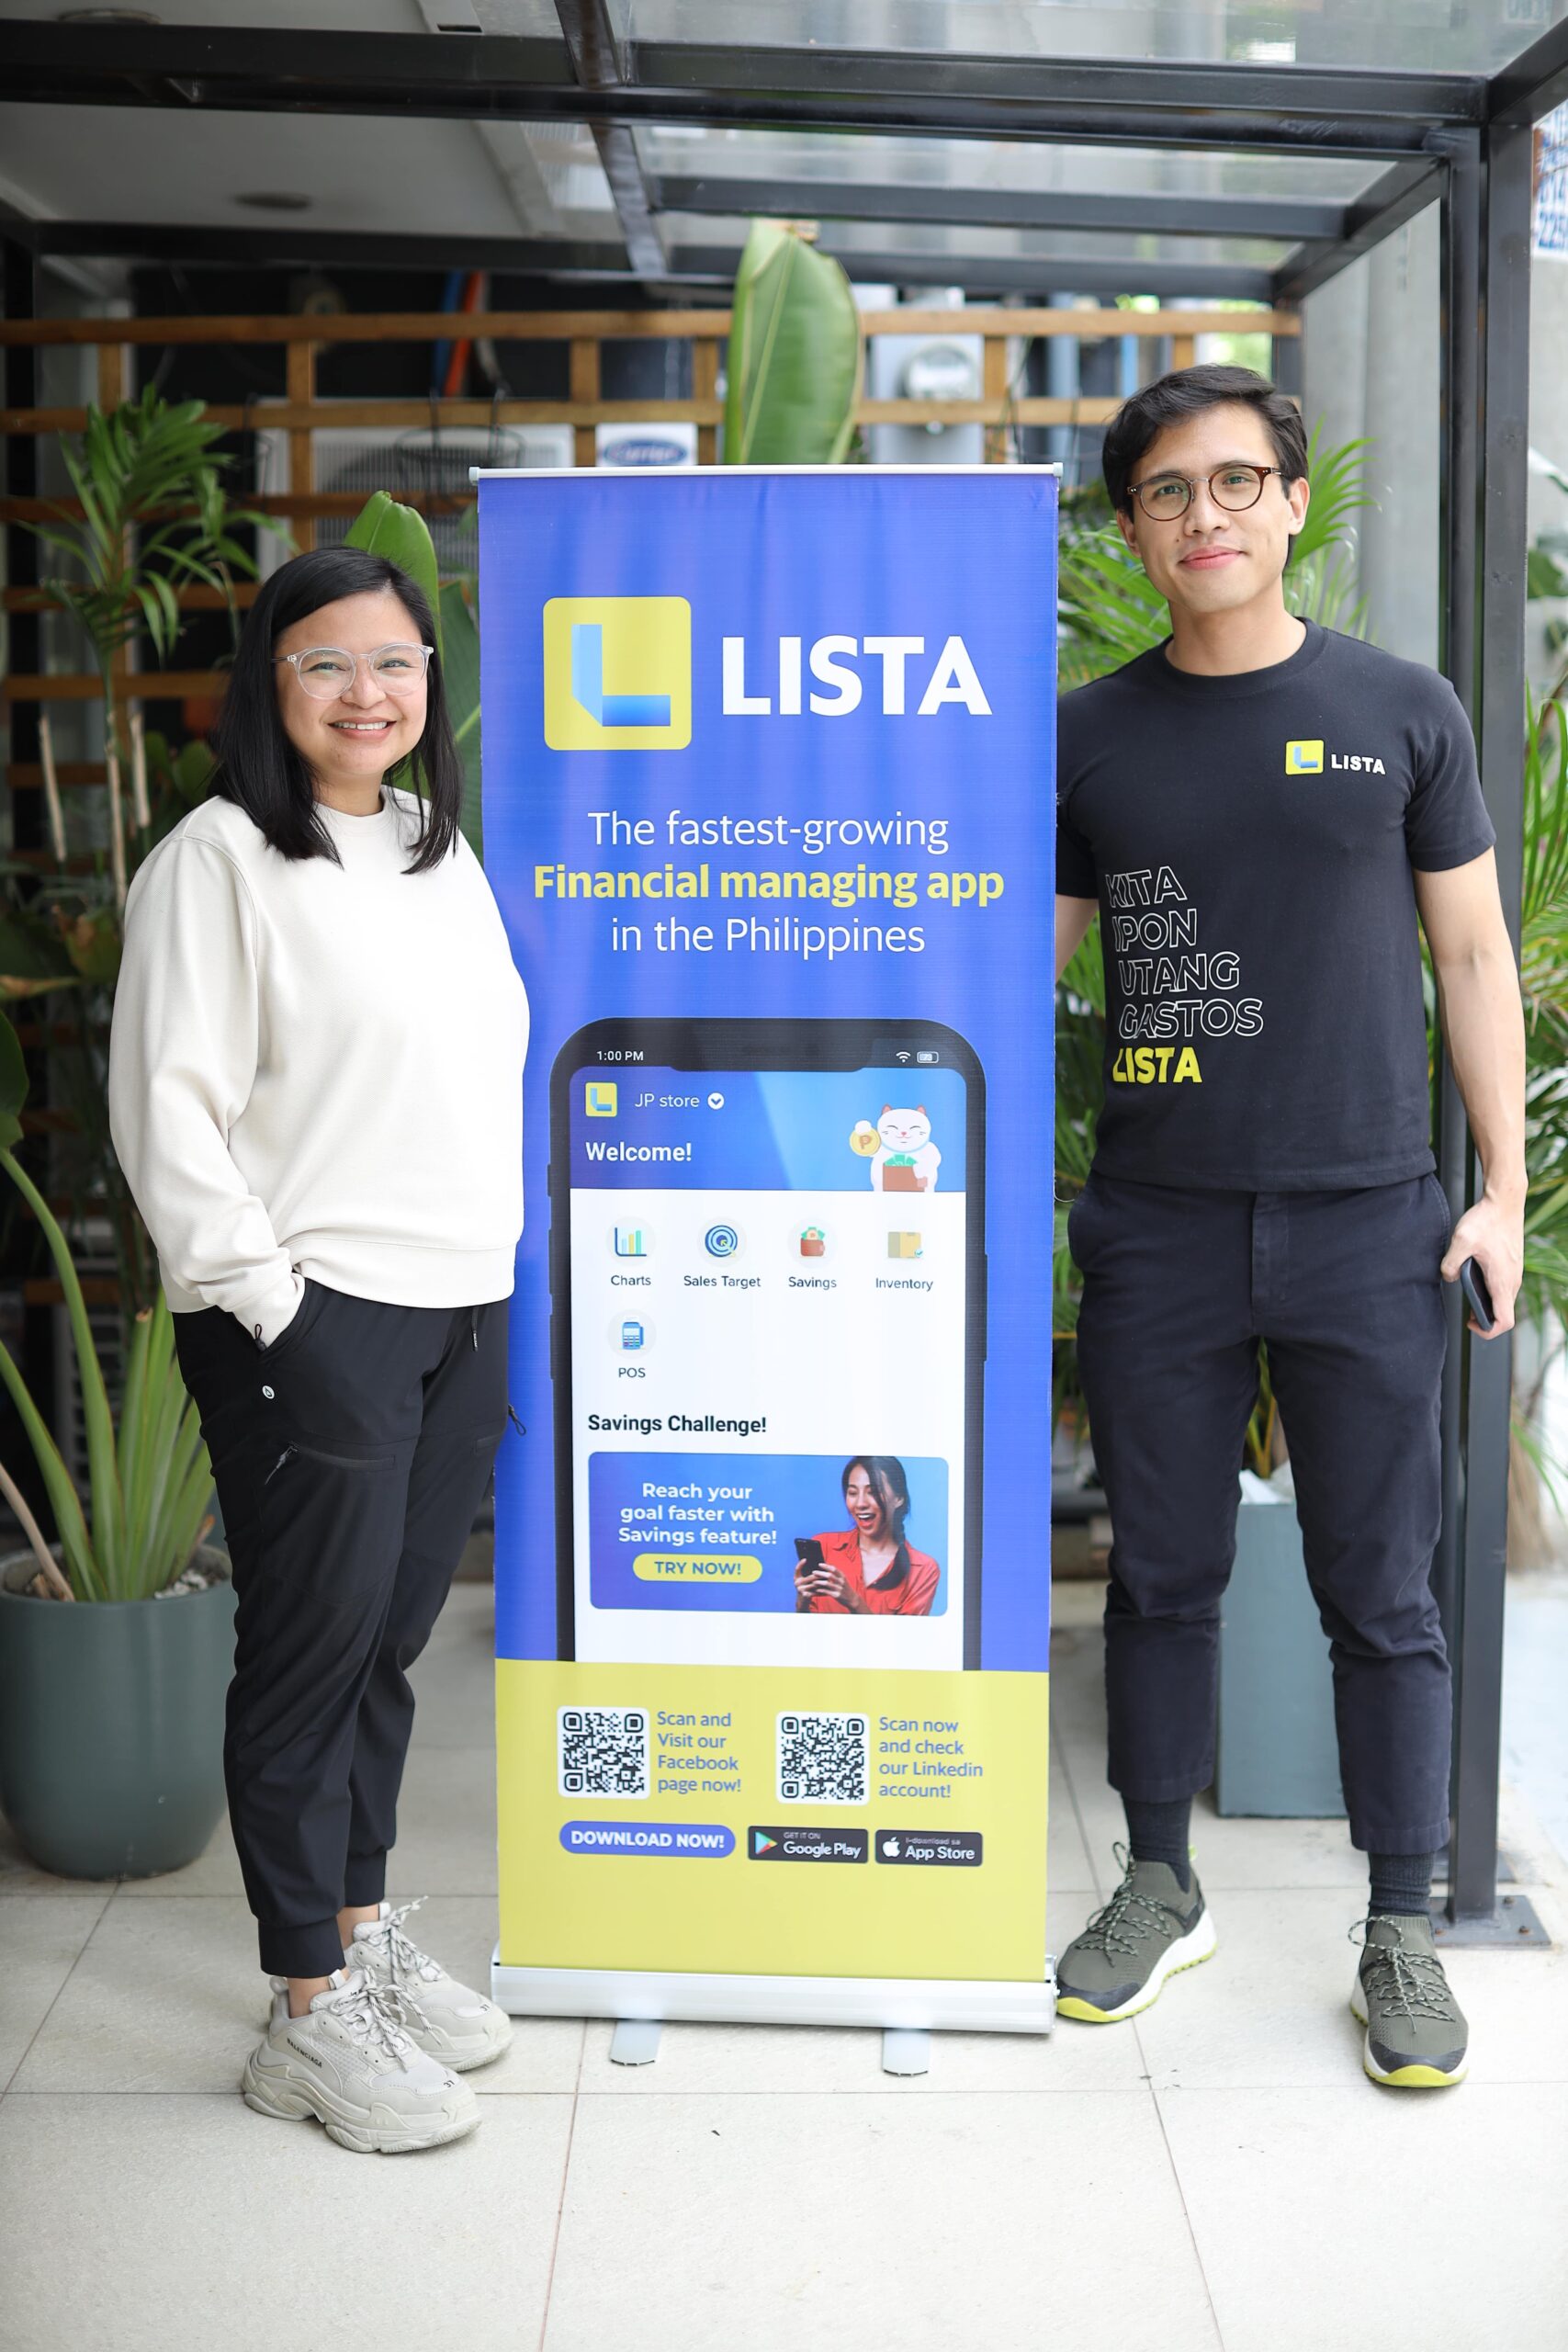 Lista, the fastest-growing financial management app in the Philippines